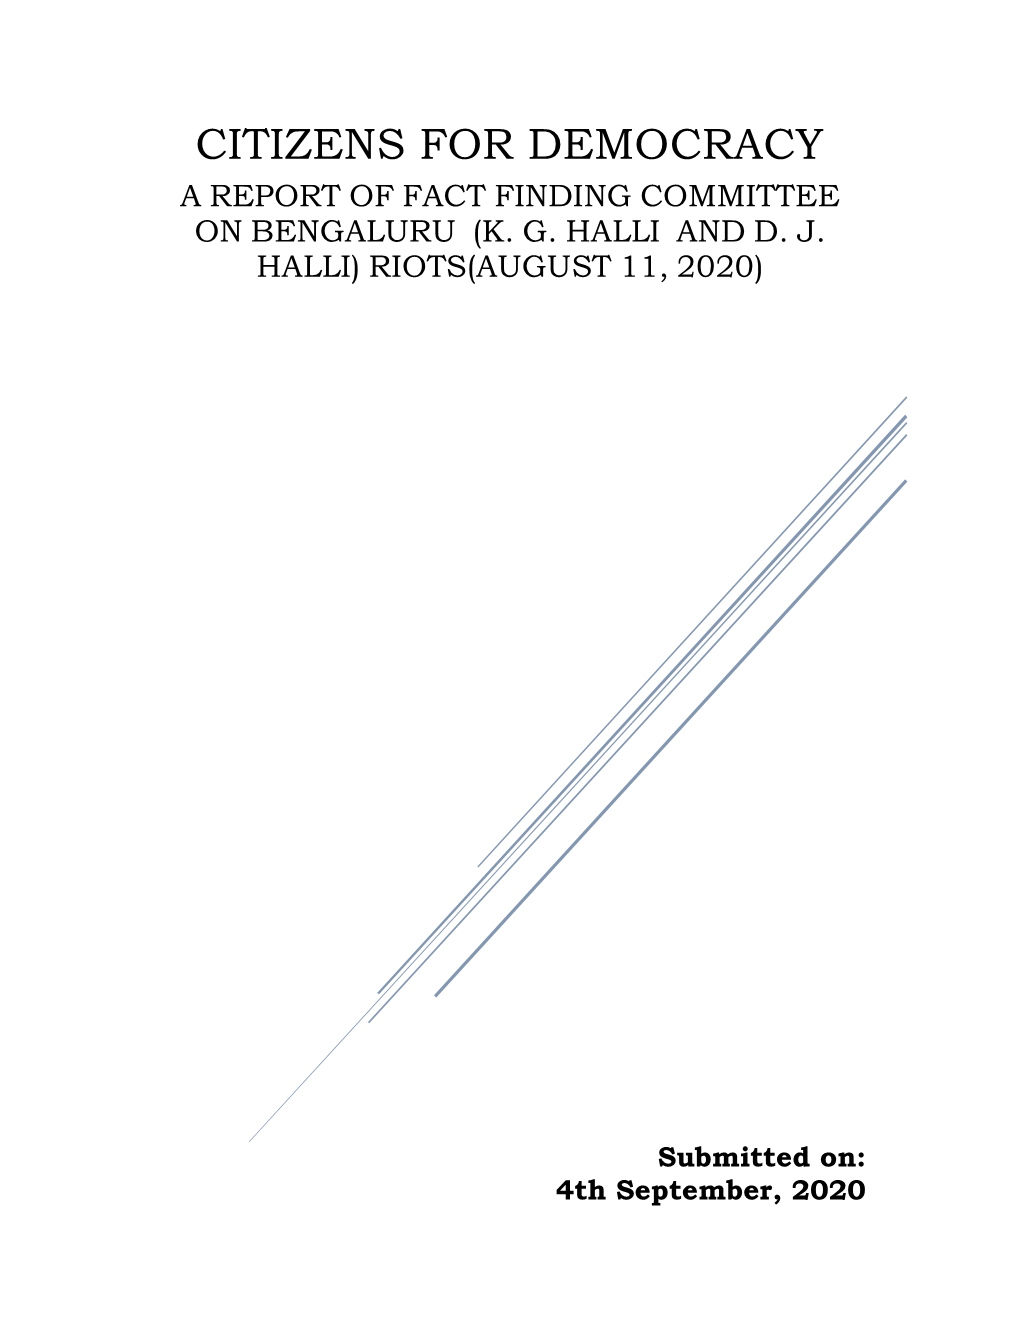 Citizens for Democracy a Report of Fact Finding Committee on Bengaluru (K